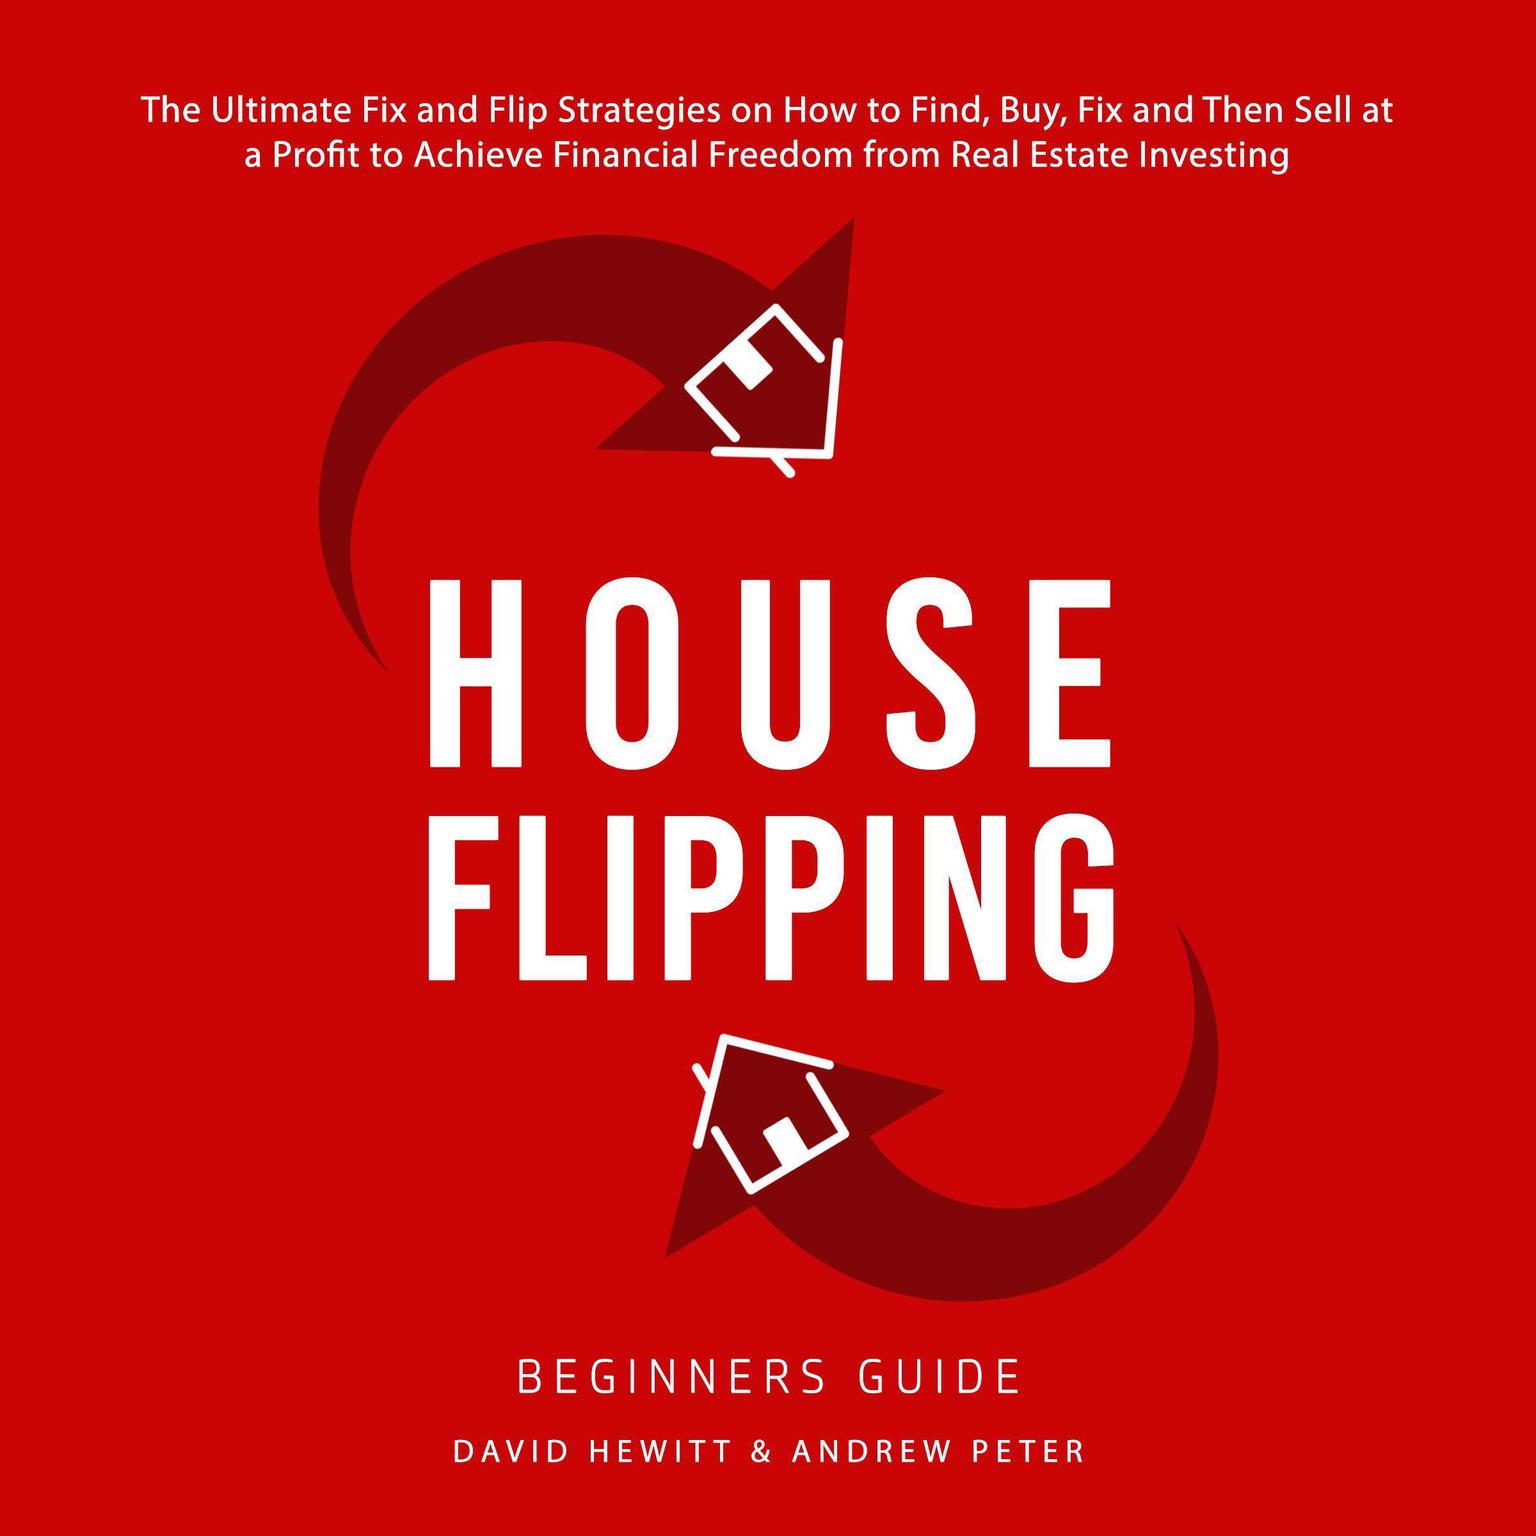 House Flipping - Beginners Guide: The Ultimate Fix and Flip Strategies on How to Find, Buy, Fix, and Then Sell at a Profit to Achieve Financial Freedom from Real Estate Investing Audiobook, by Andrew Peter